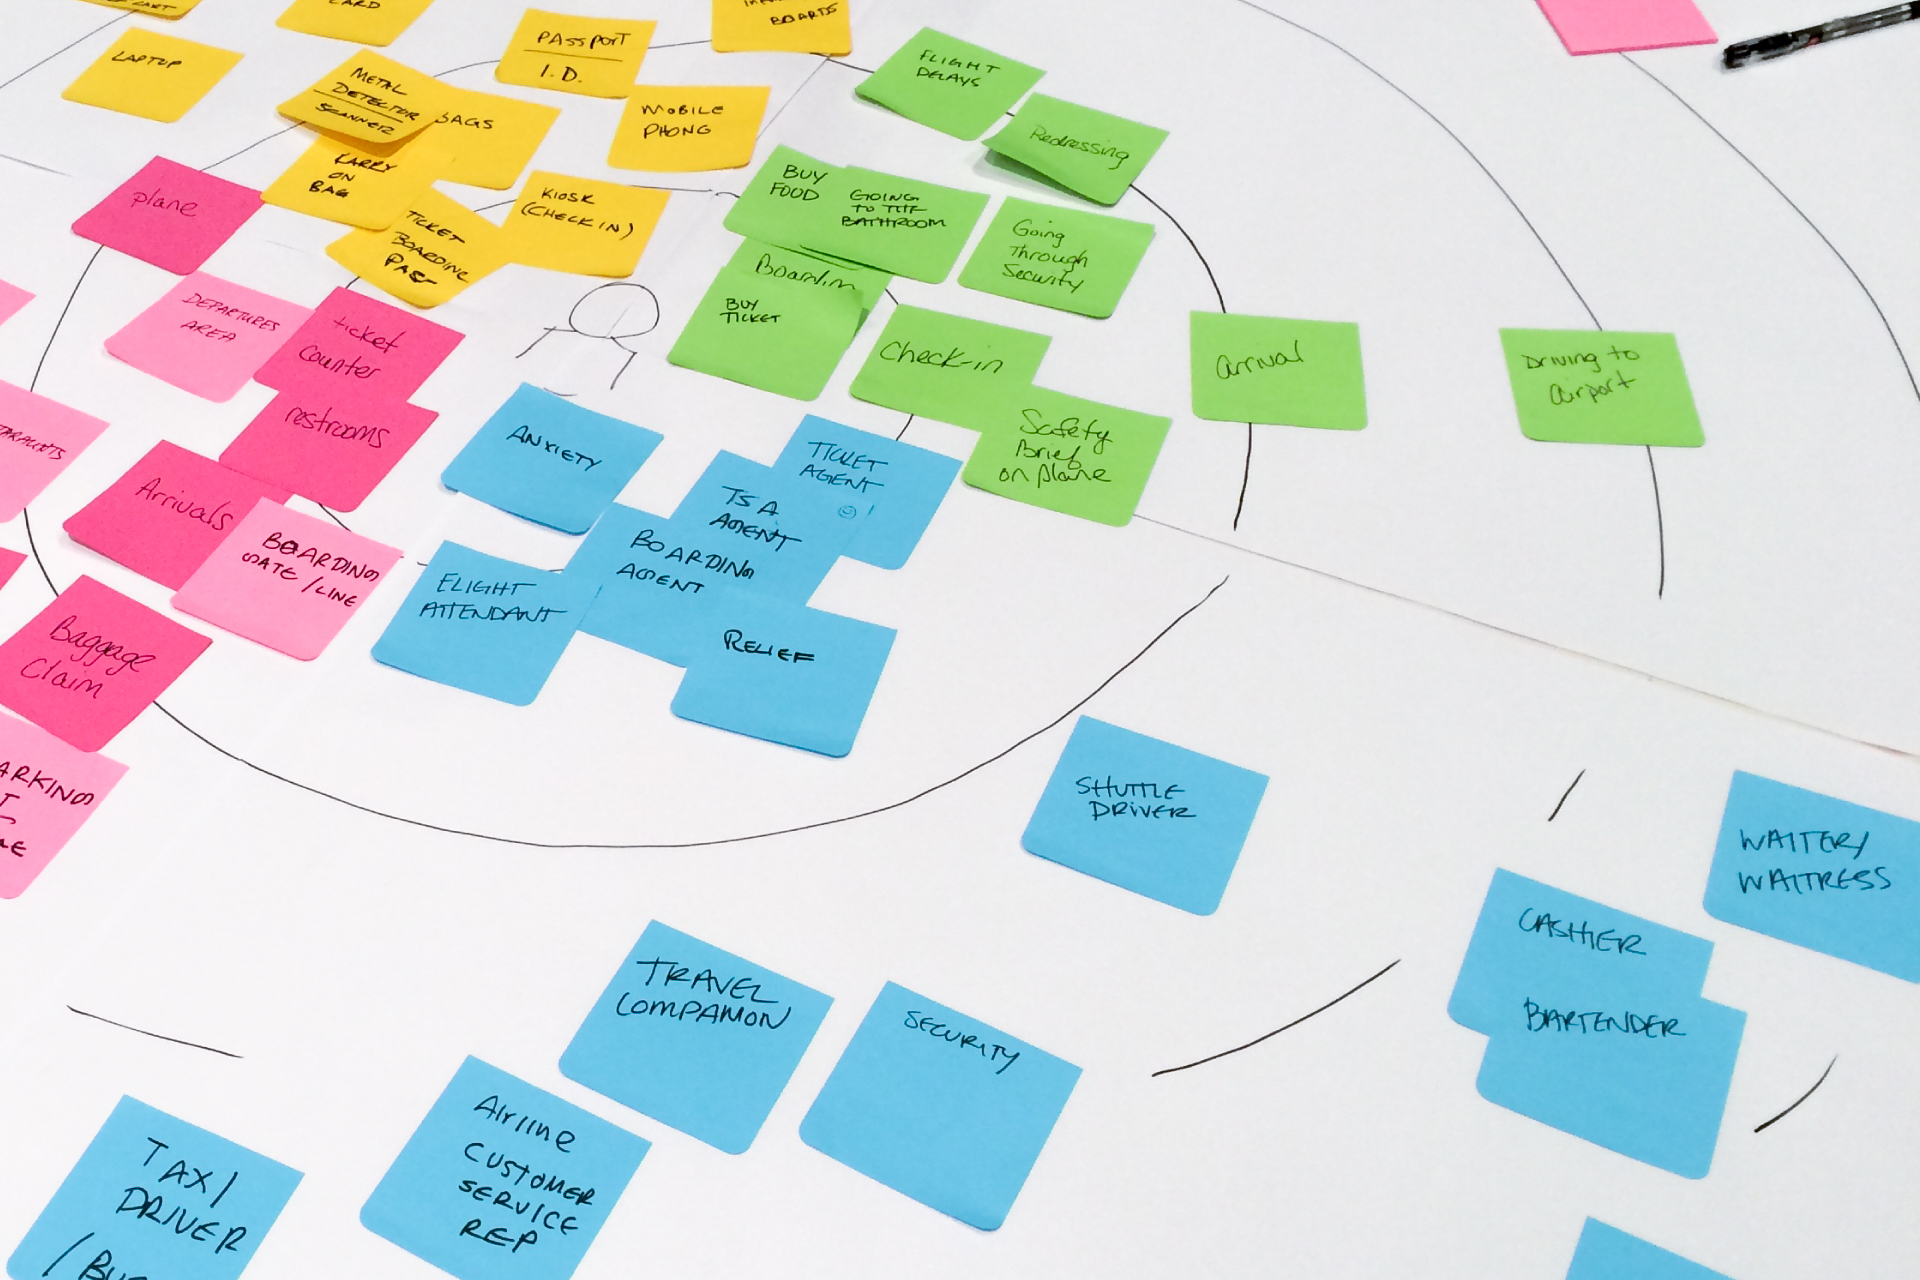 Why Human-Centered Design is an Expectation